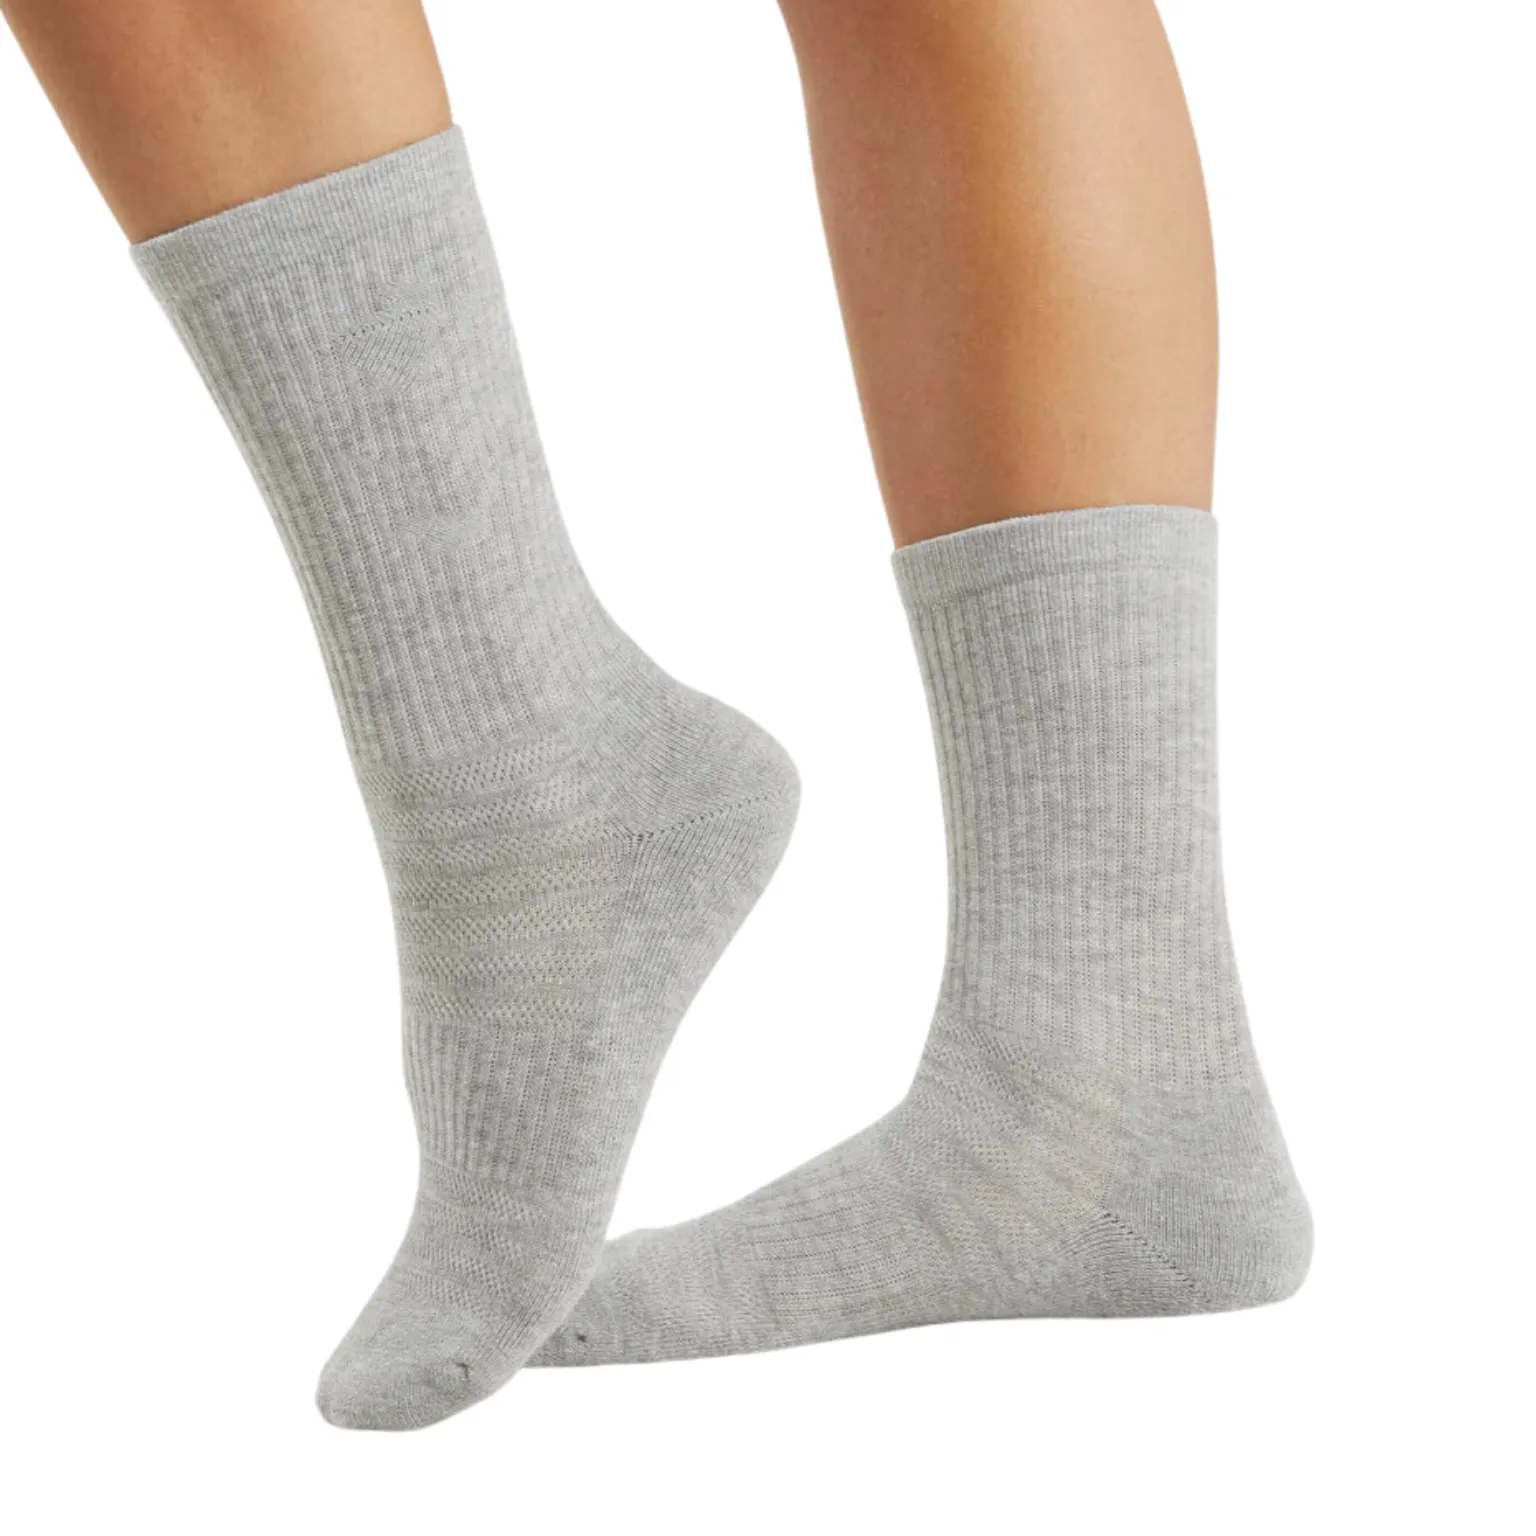 Crew Socks manufacturing with trendy design